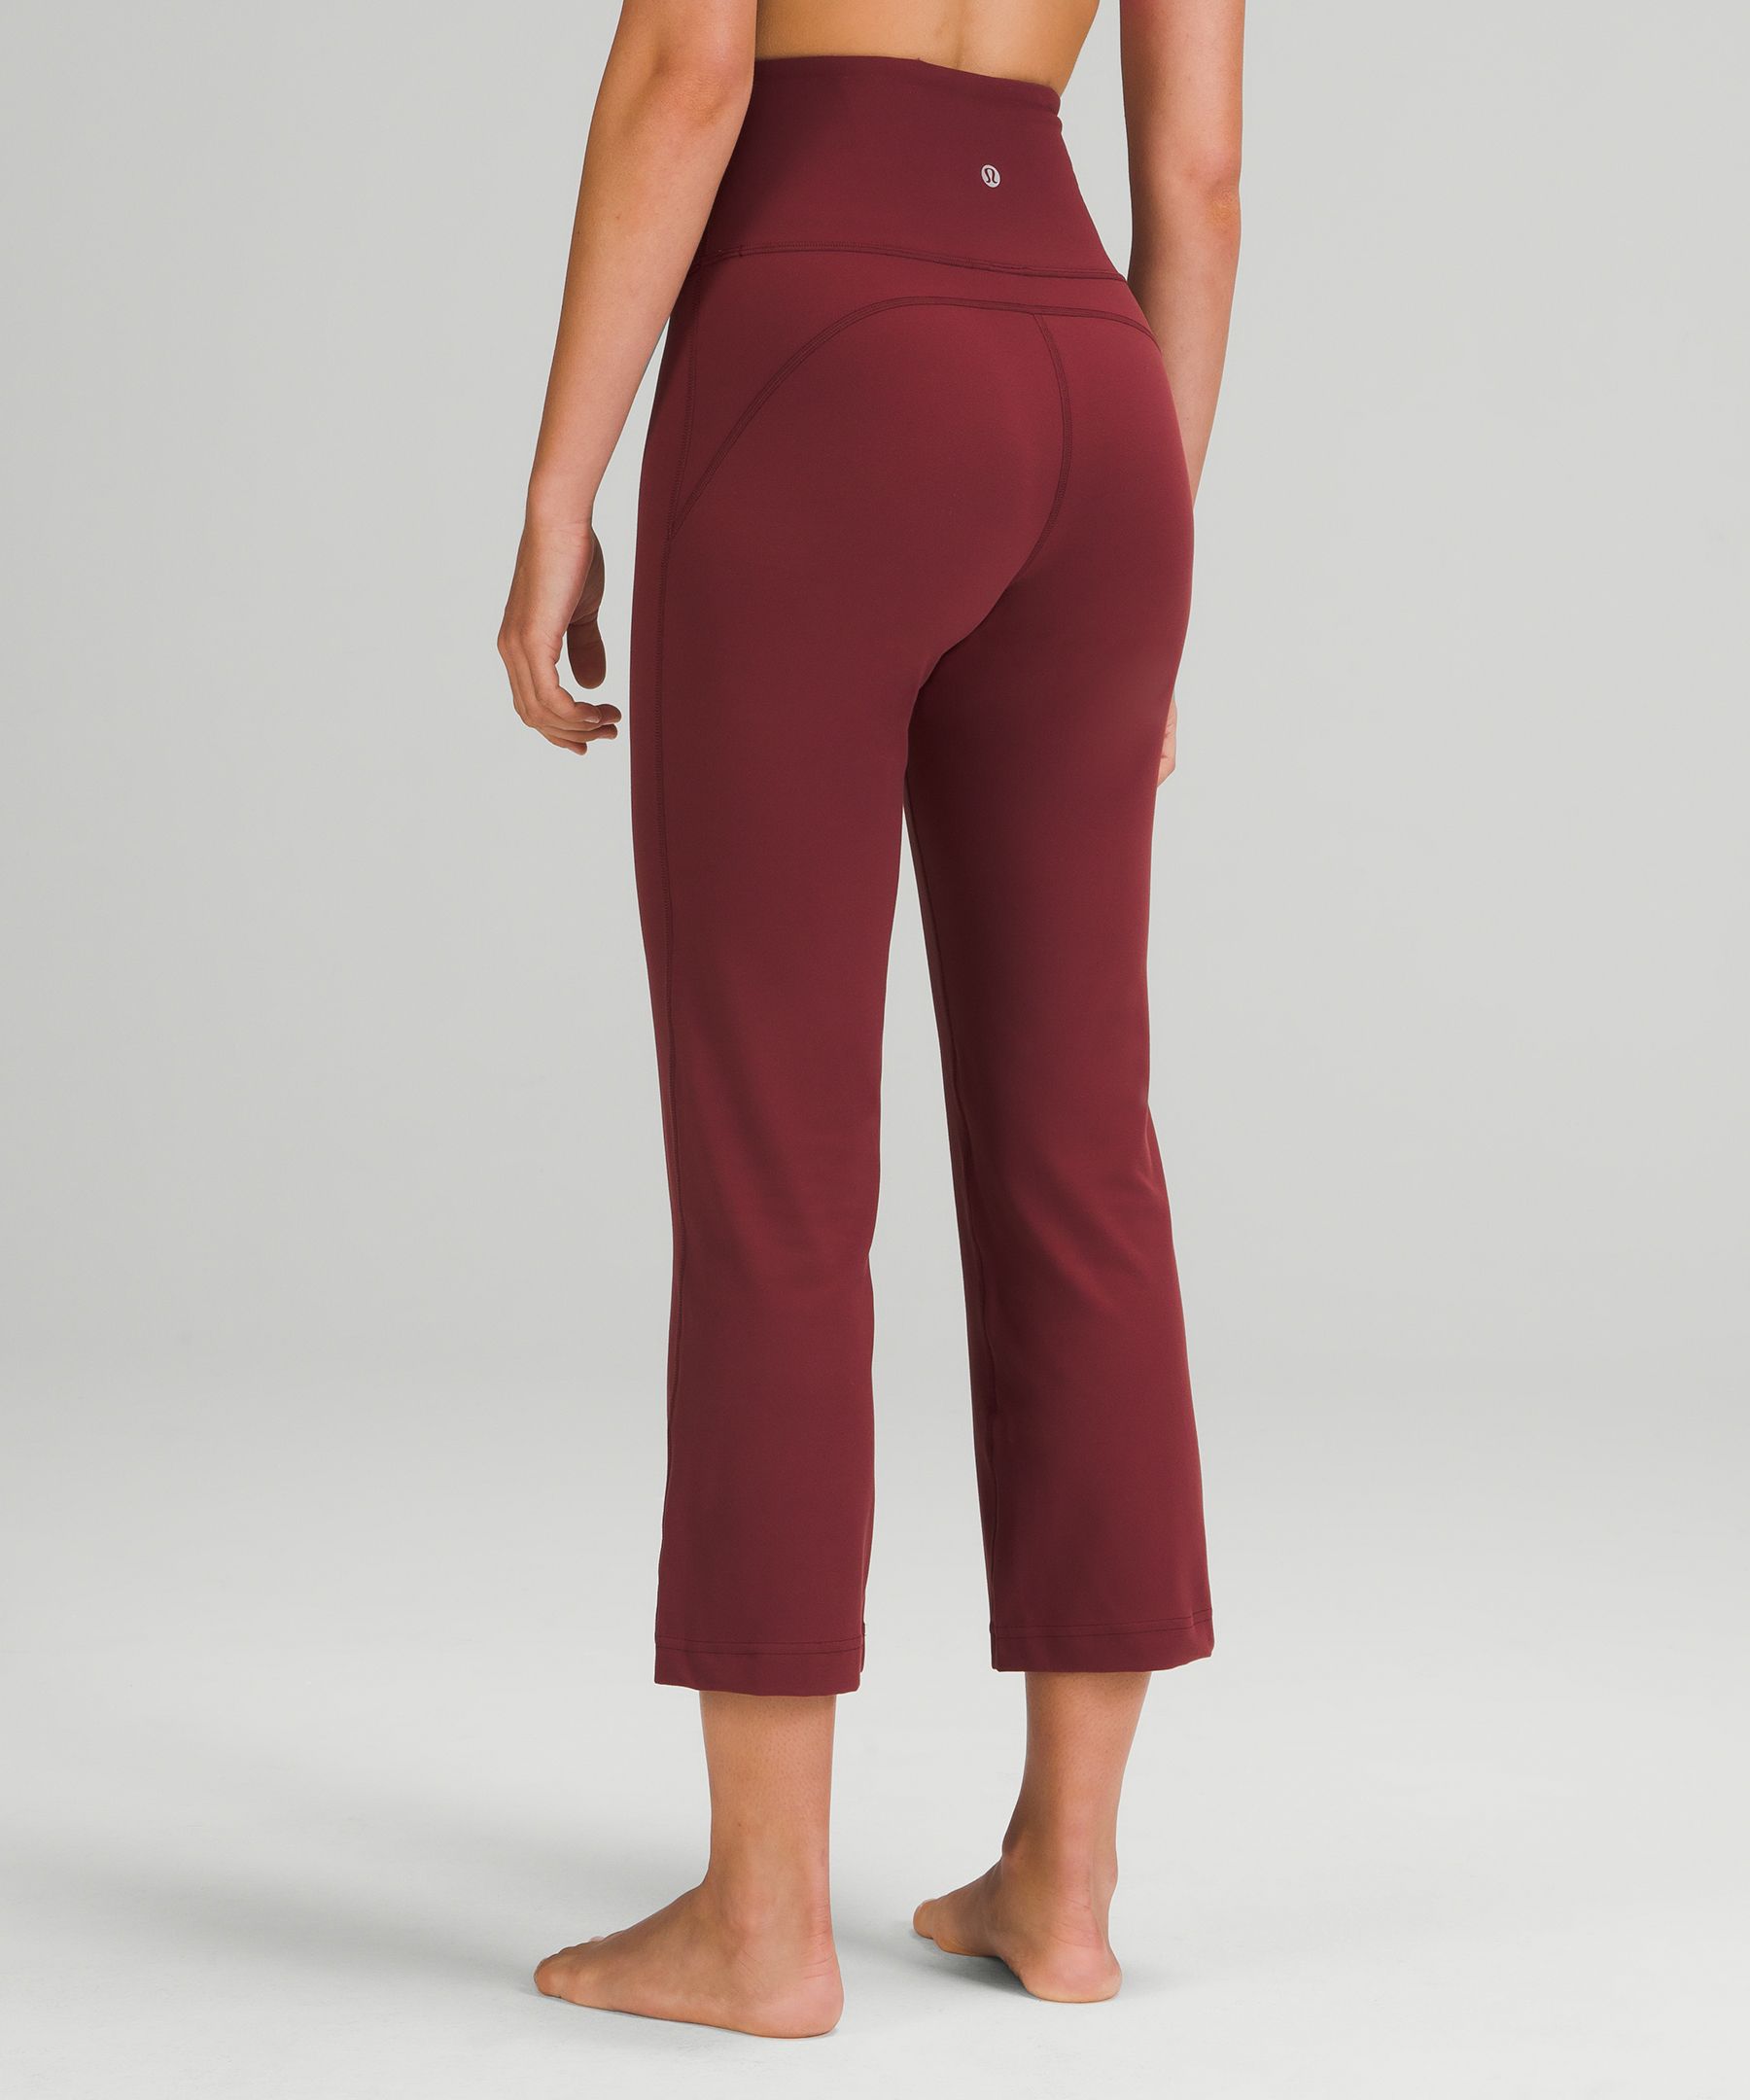 Lululemon Groove Super High Rise Cropped